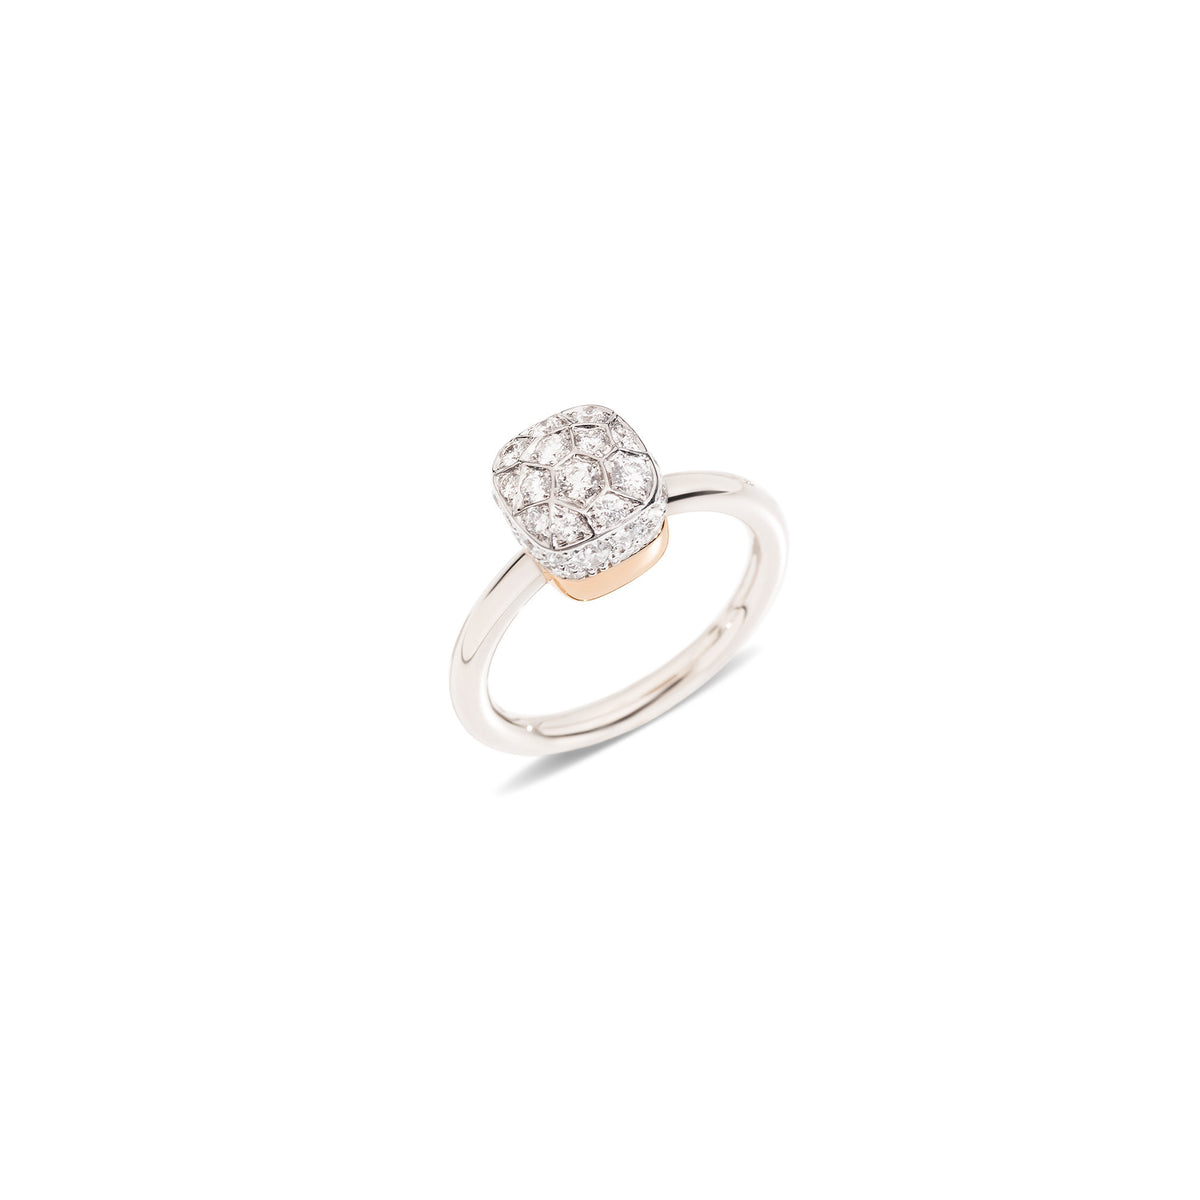 Nudo Petit Ring in 18k White Gold and Rose Gold with Diamonds - Orsini Jewellers NZ